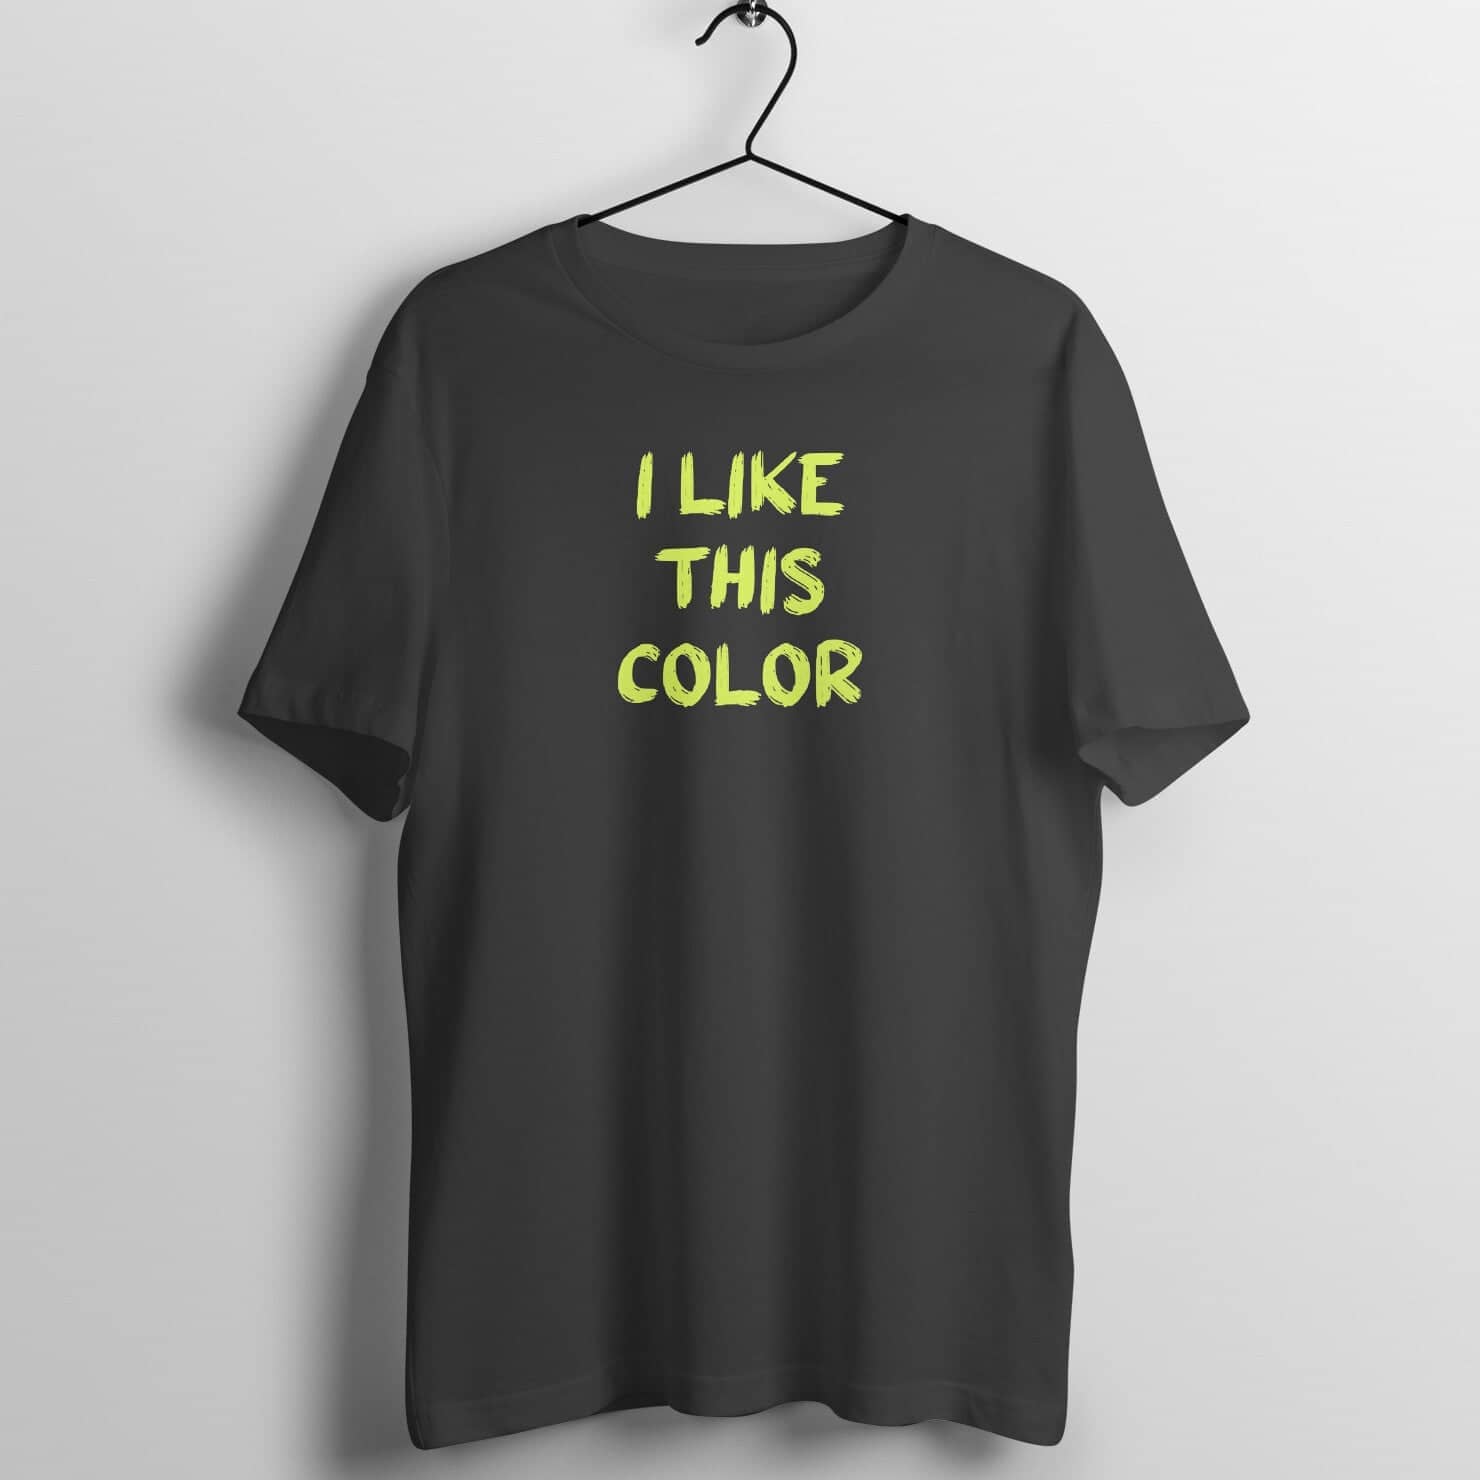 I Like This Color Special Black T Shirt for Men and Women Shirts & Tops Printrove Black S 